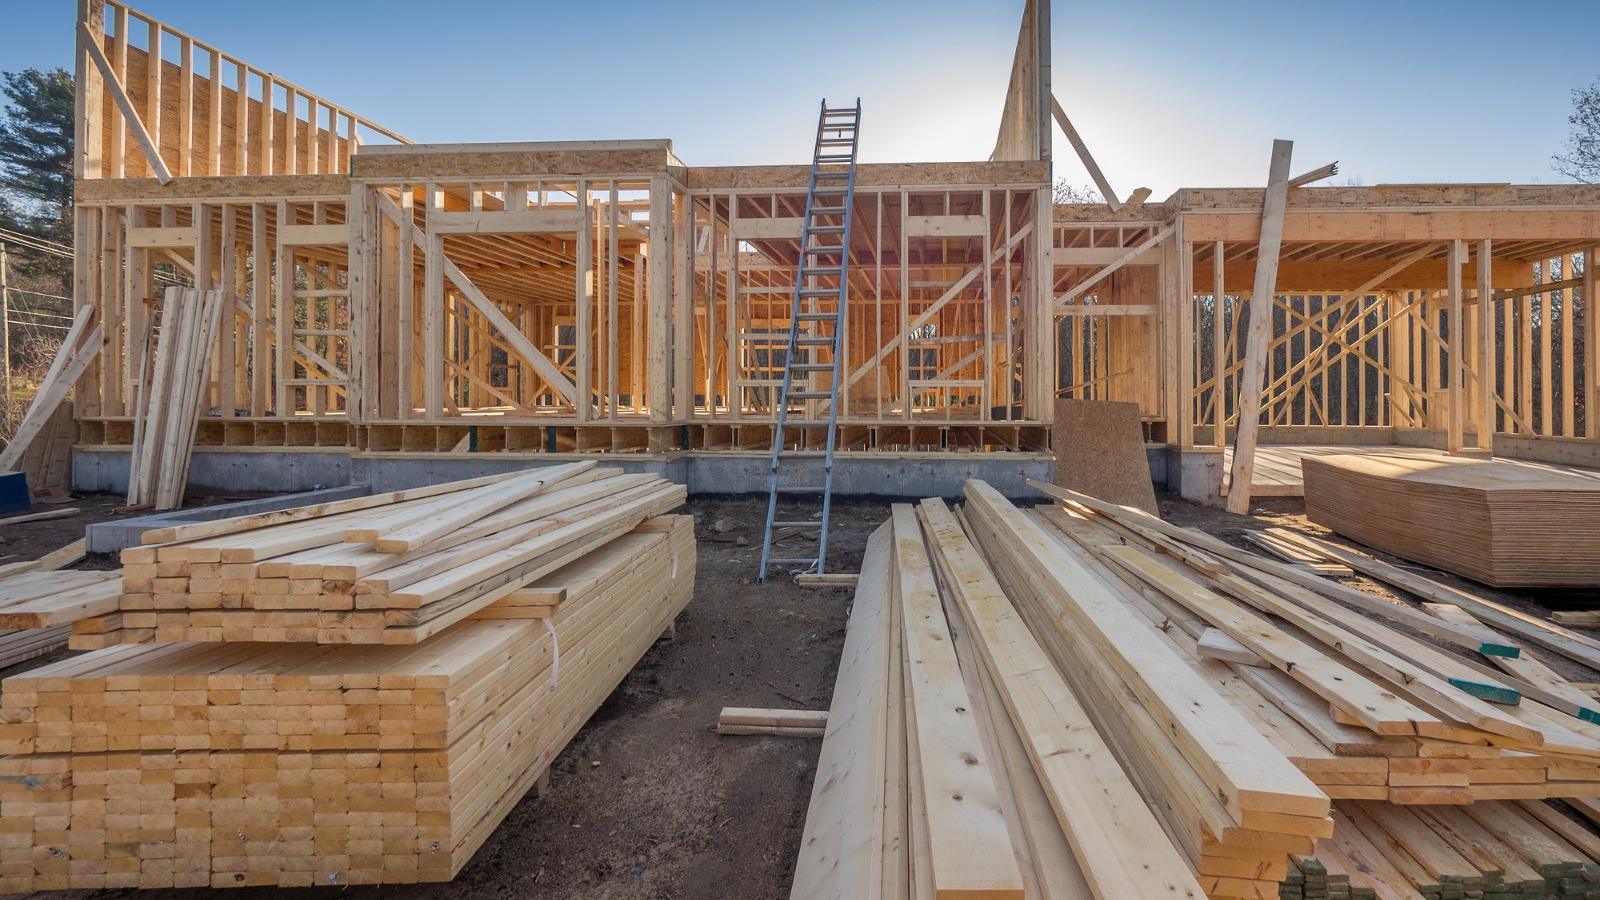 Building Materials Prices Rise Across the Board in March